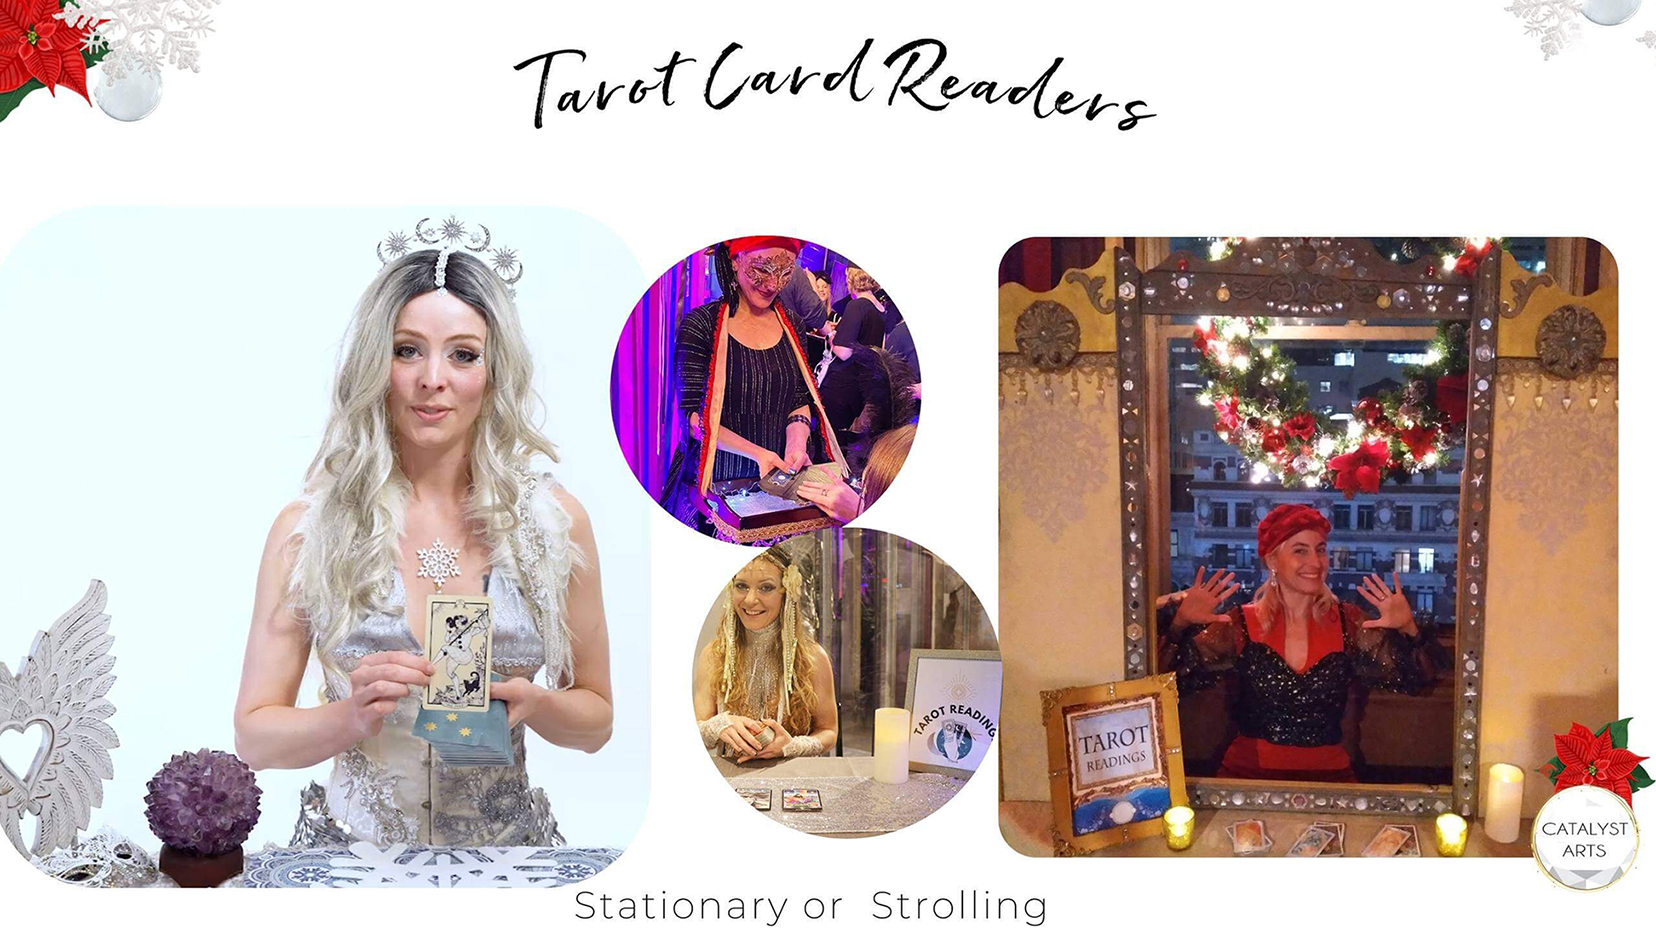 best tarot card reader for events & holiday parties in bay area by Catalyst Arts